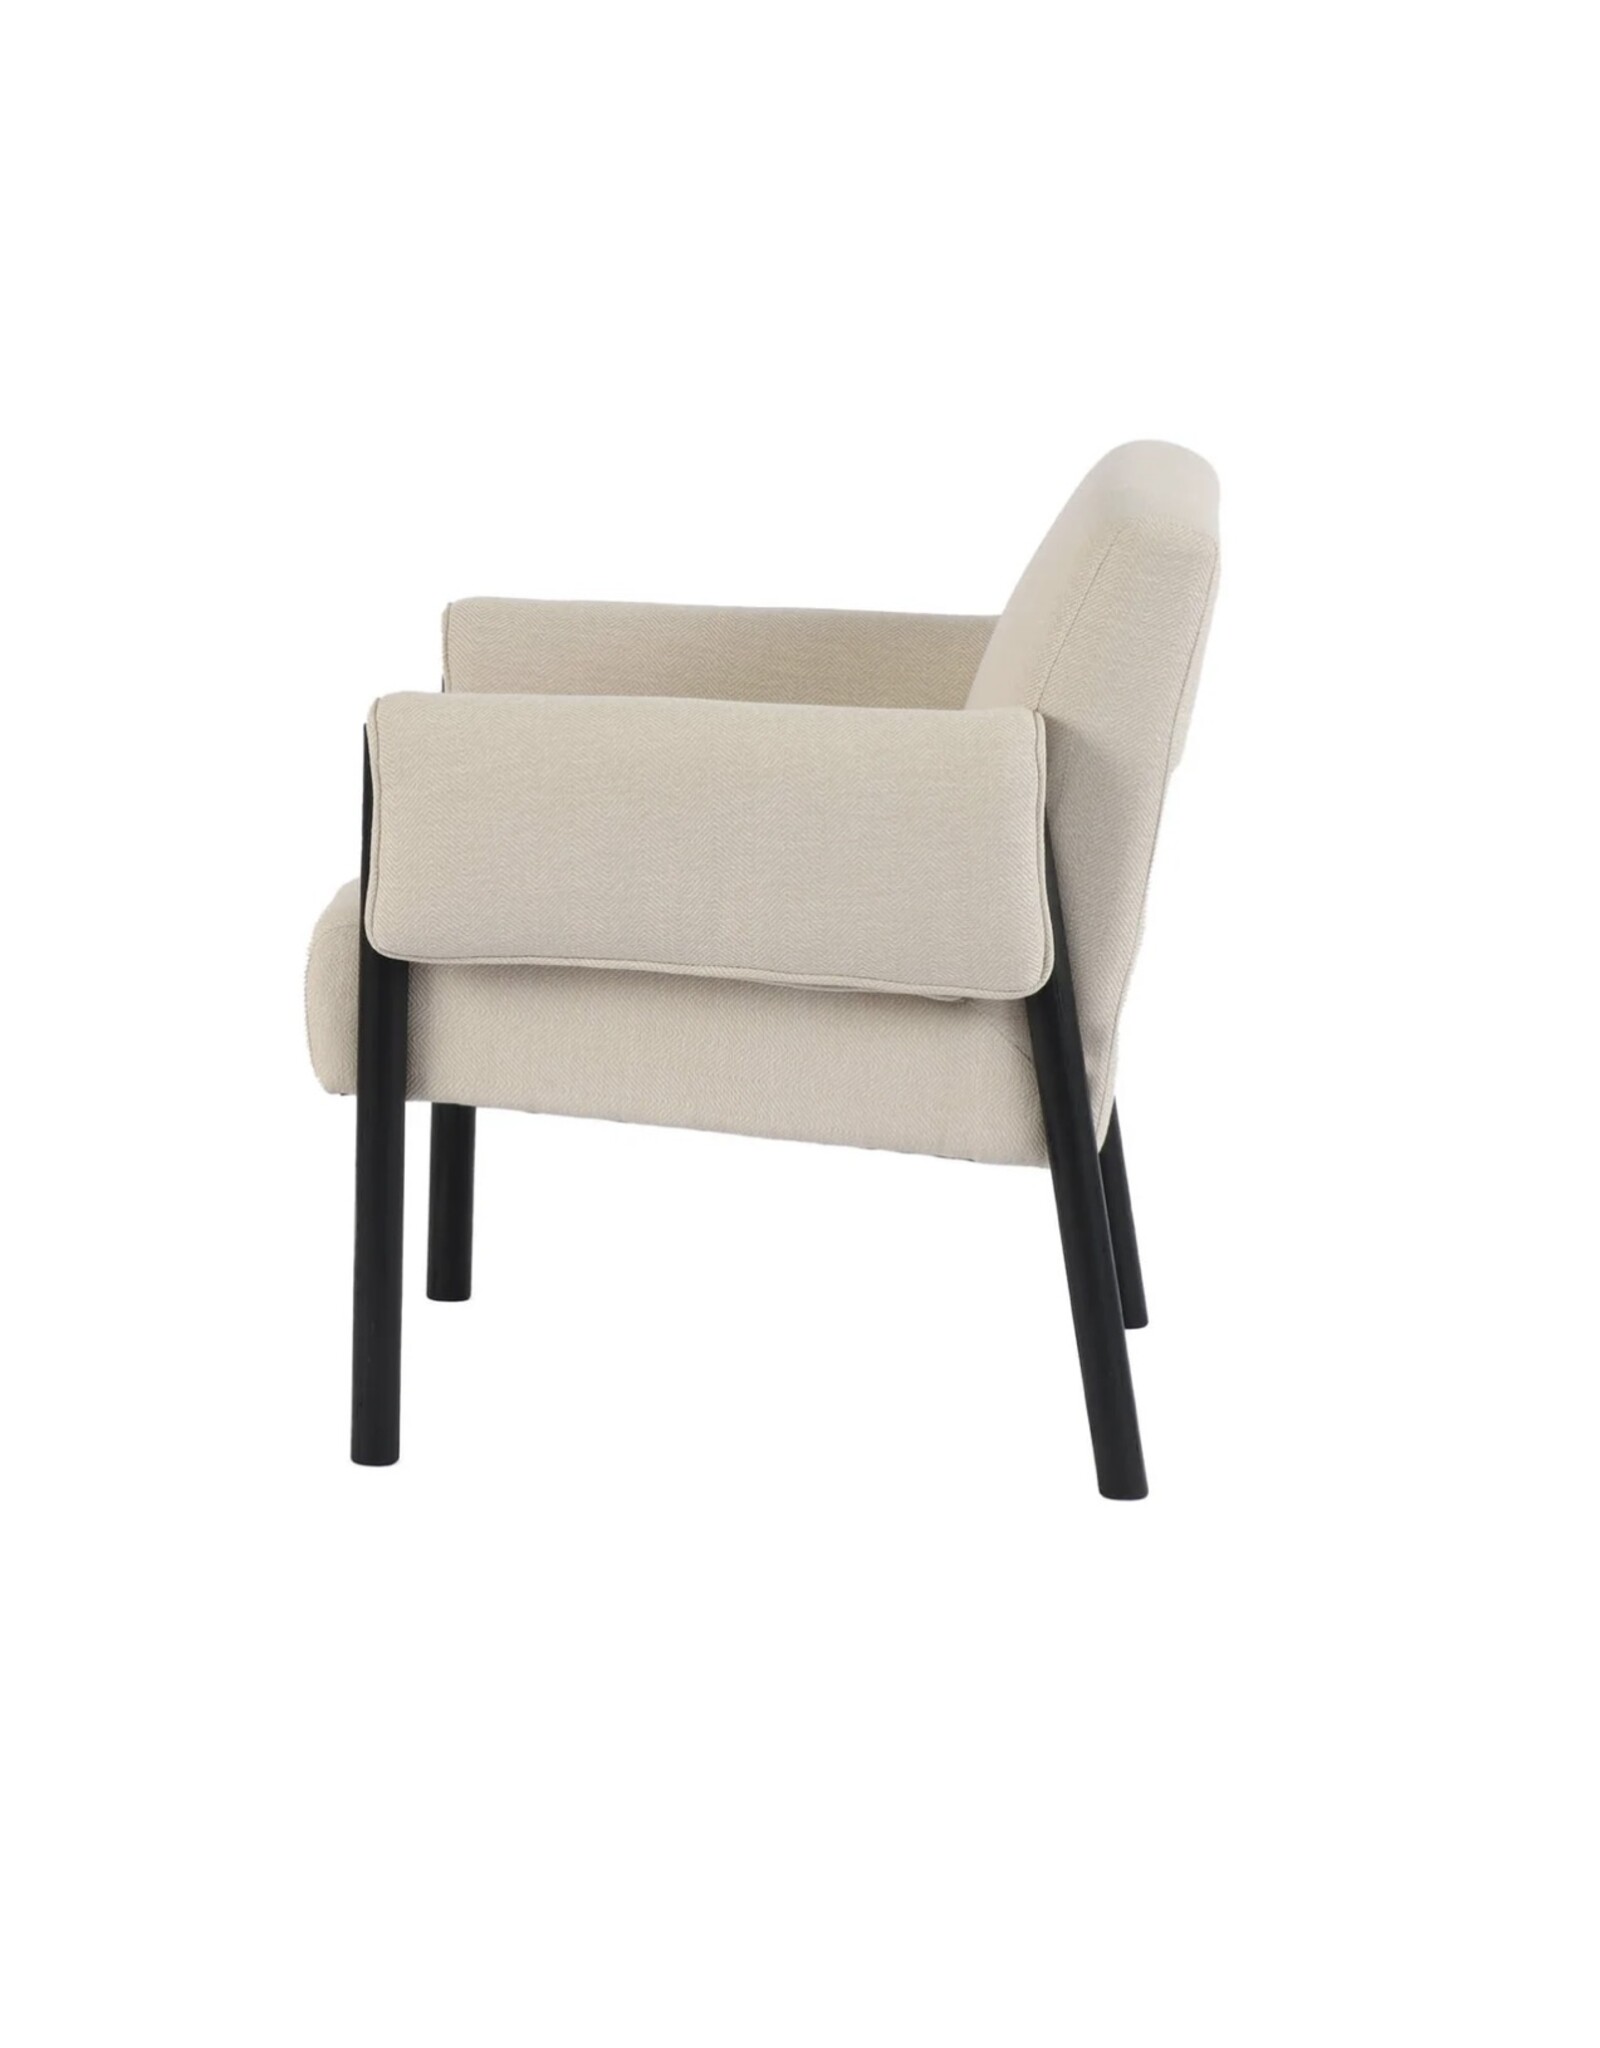 LH Imports LH Forest Club Chair SNH-68-MB